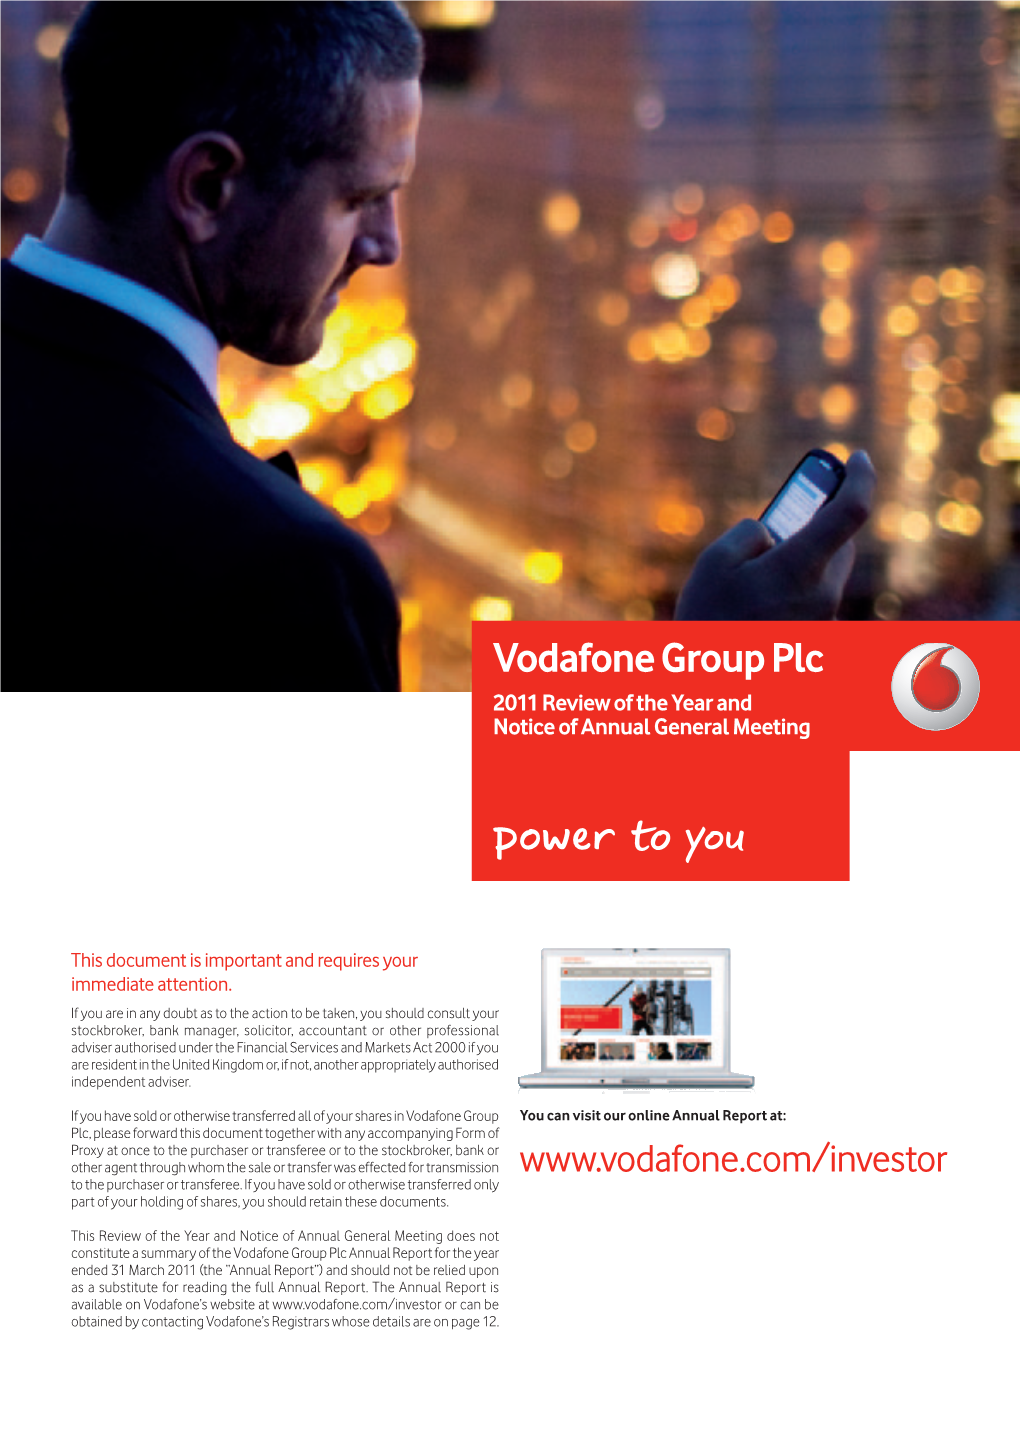 Vodafone Group Plc 2011 Review of the Year and Notice of Annual General Meeting